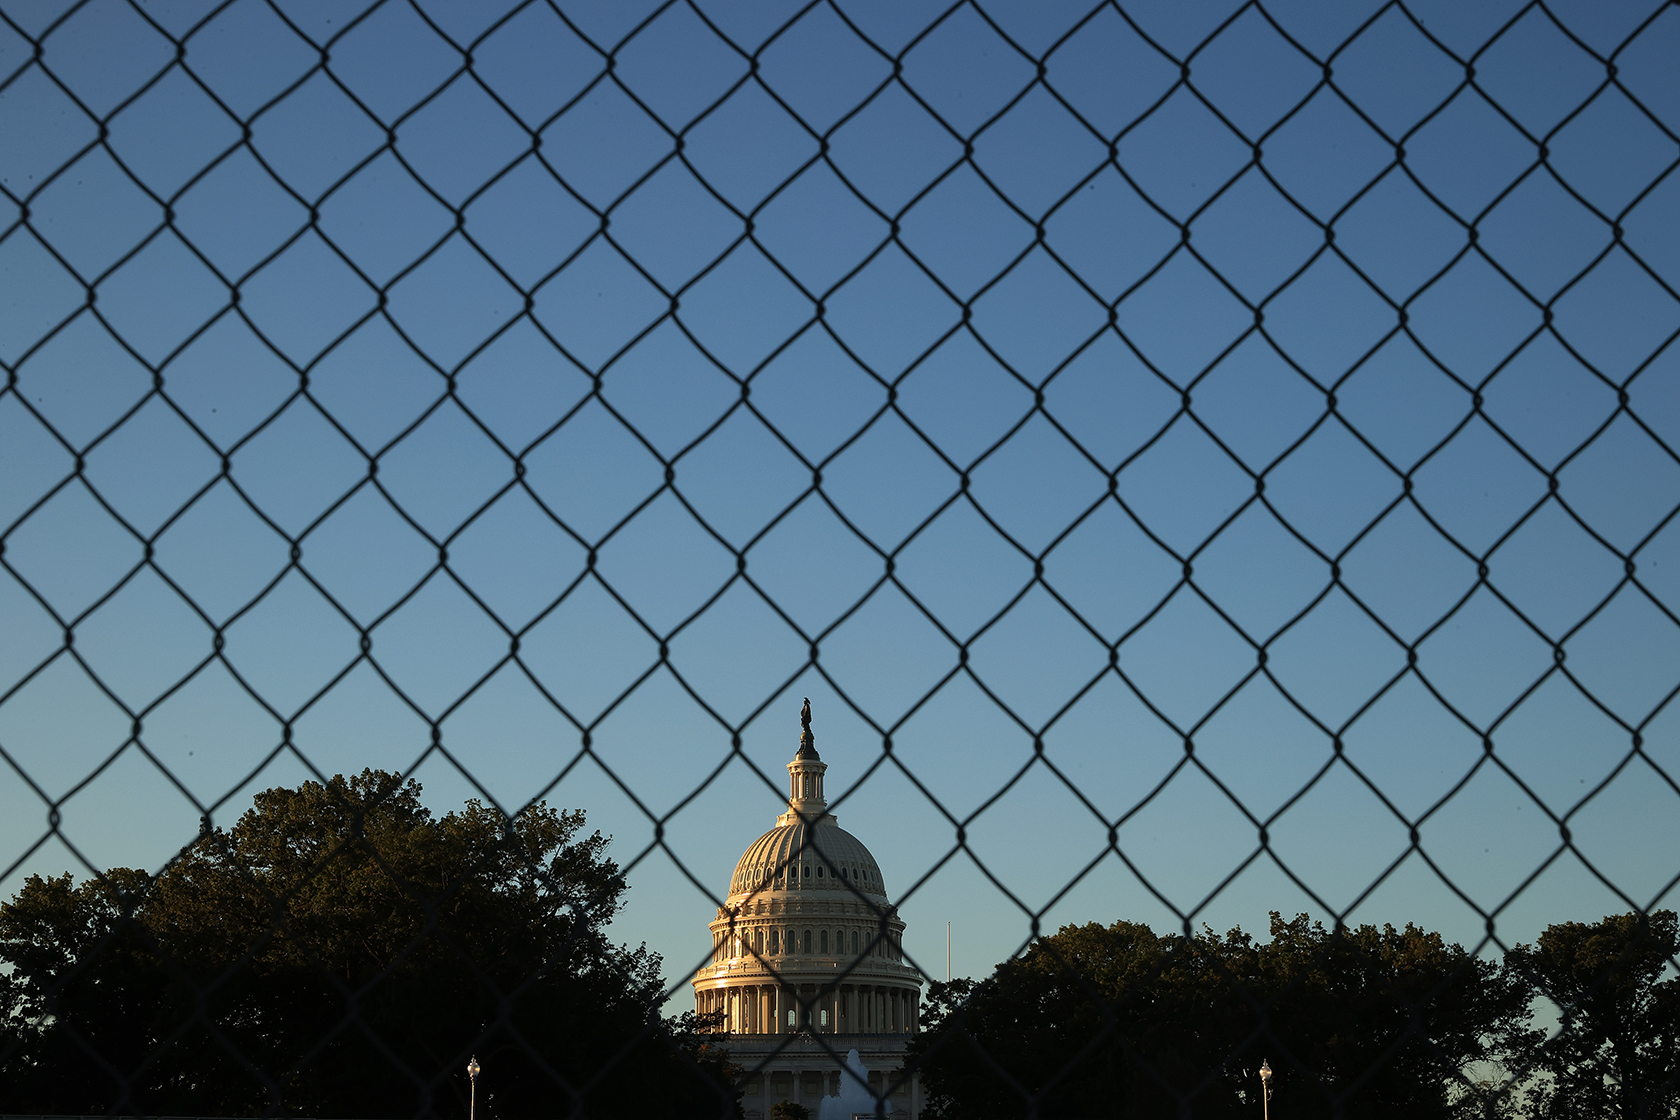 Capitol dome at sunrise, seen through chain-link fencing